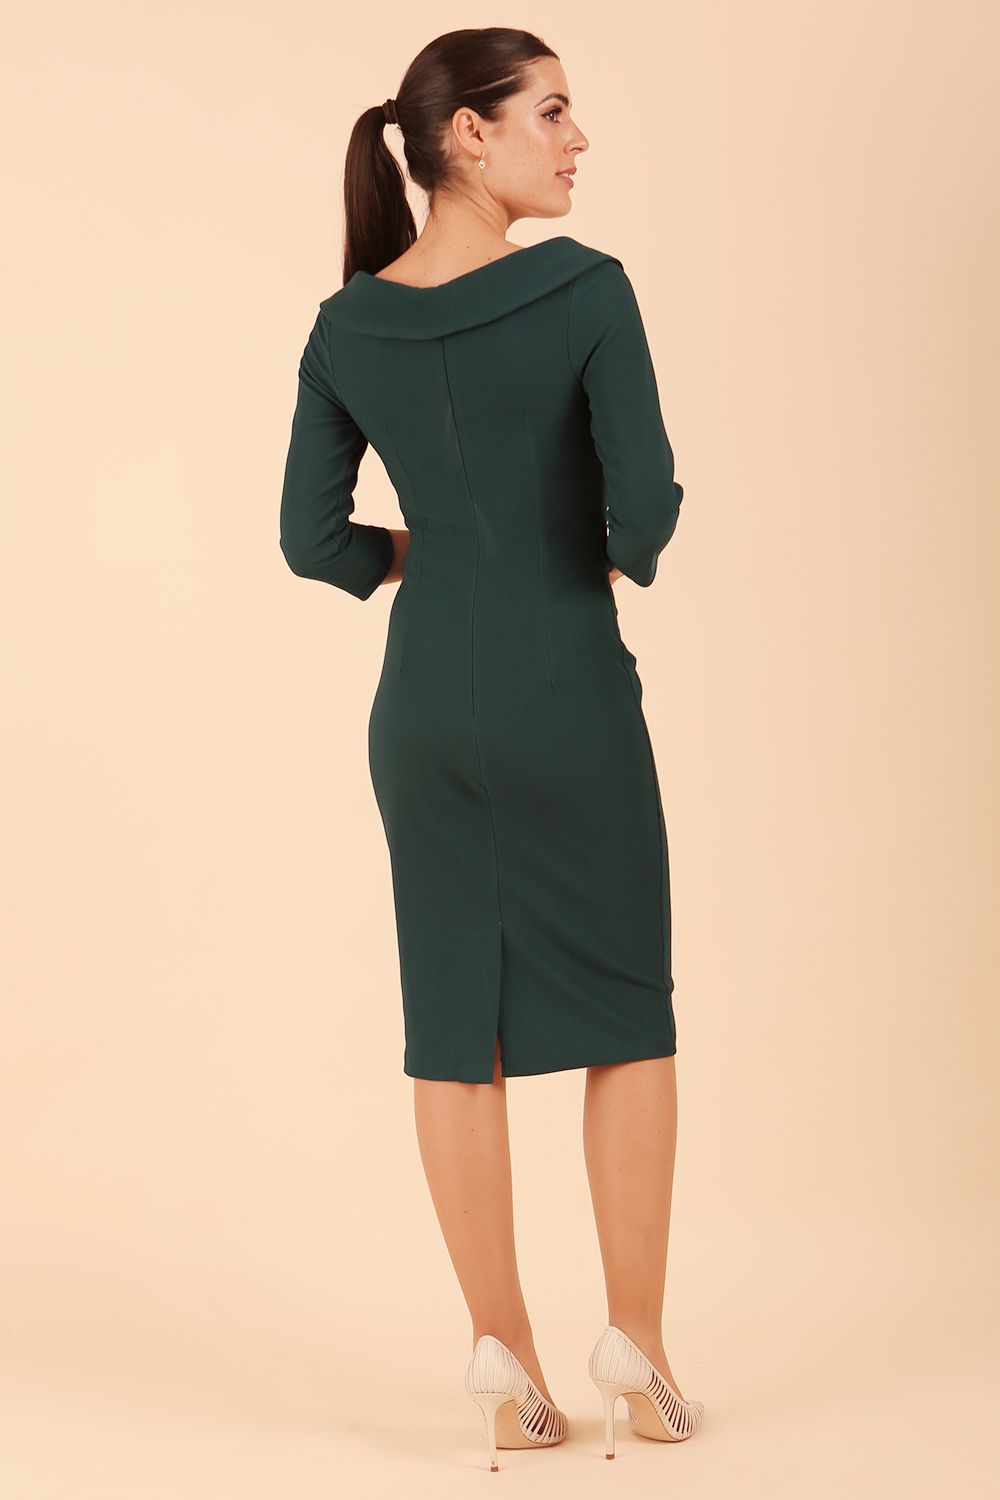 Model wearing diva catwalk Monique 3/4 Sleeve Pencil Dress with Overlapping Folded Round Neckline and 3/4 sleeves and knee length in Green Gables back